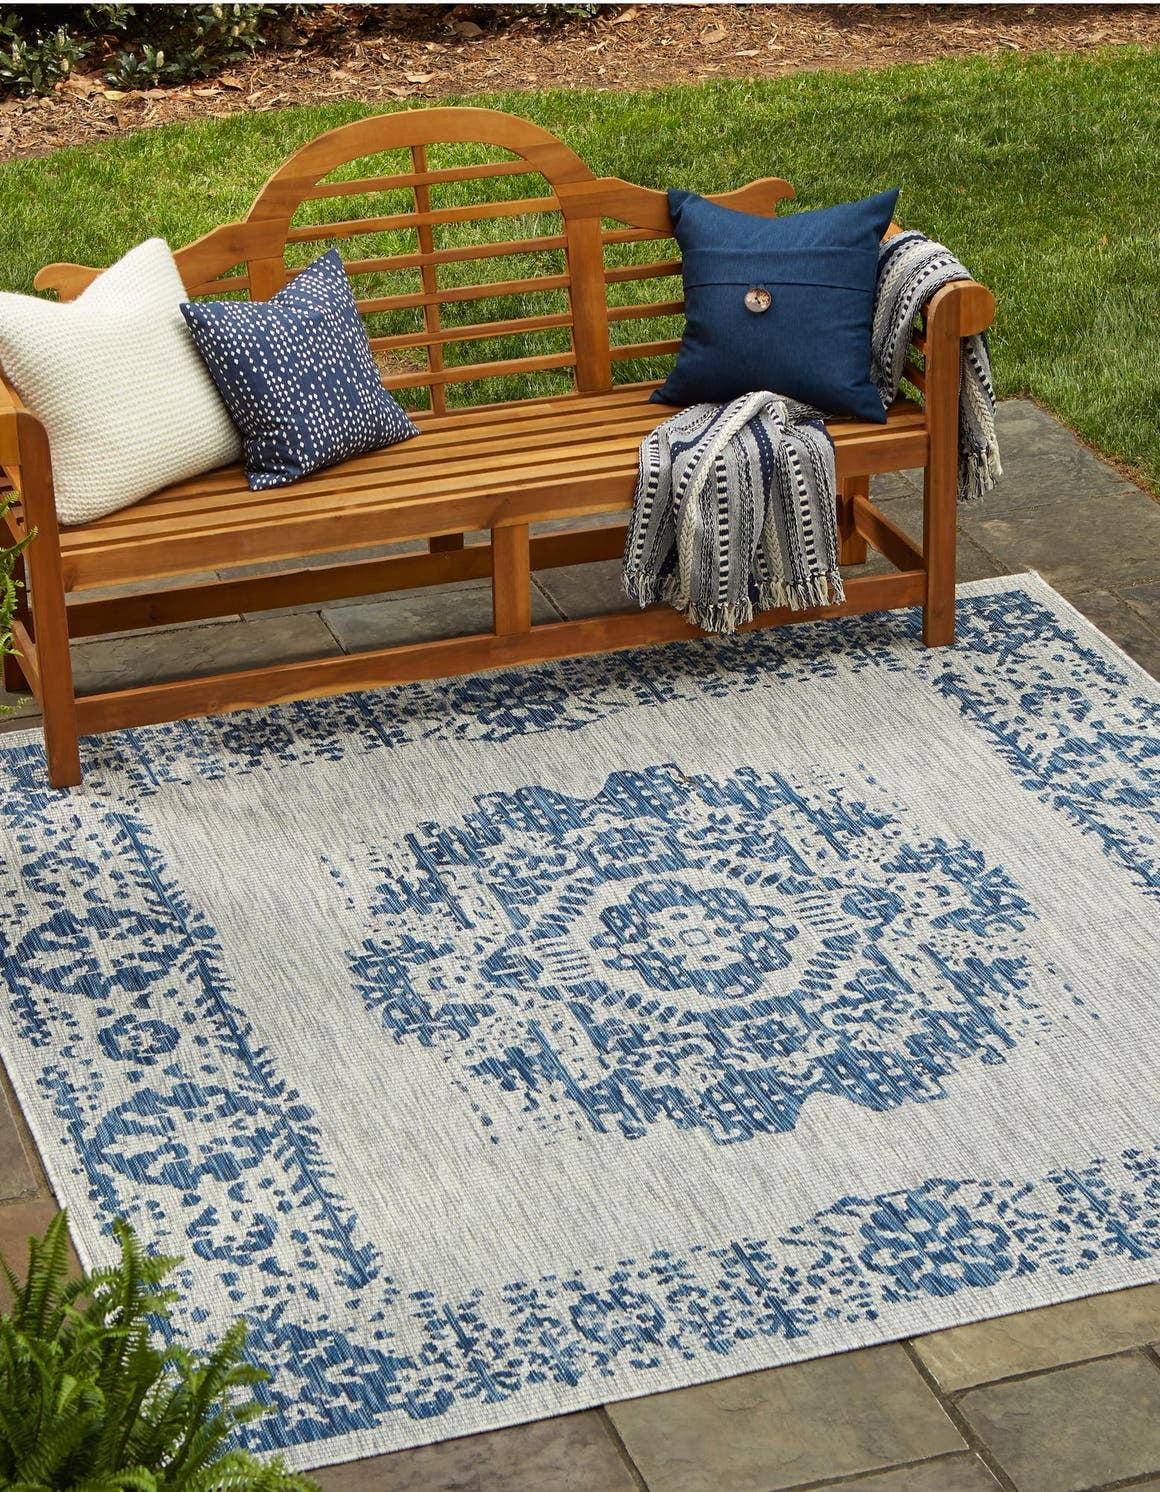 Modern Matrix 5' Square Outdoor Rug in Blue with Easy Care Synthetic Weave